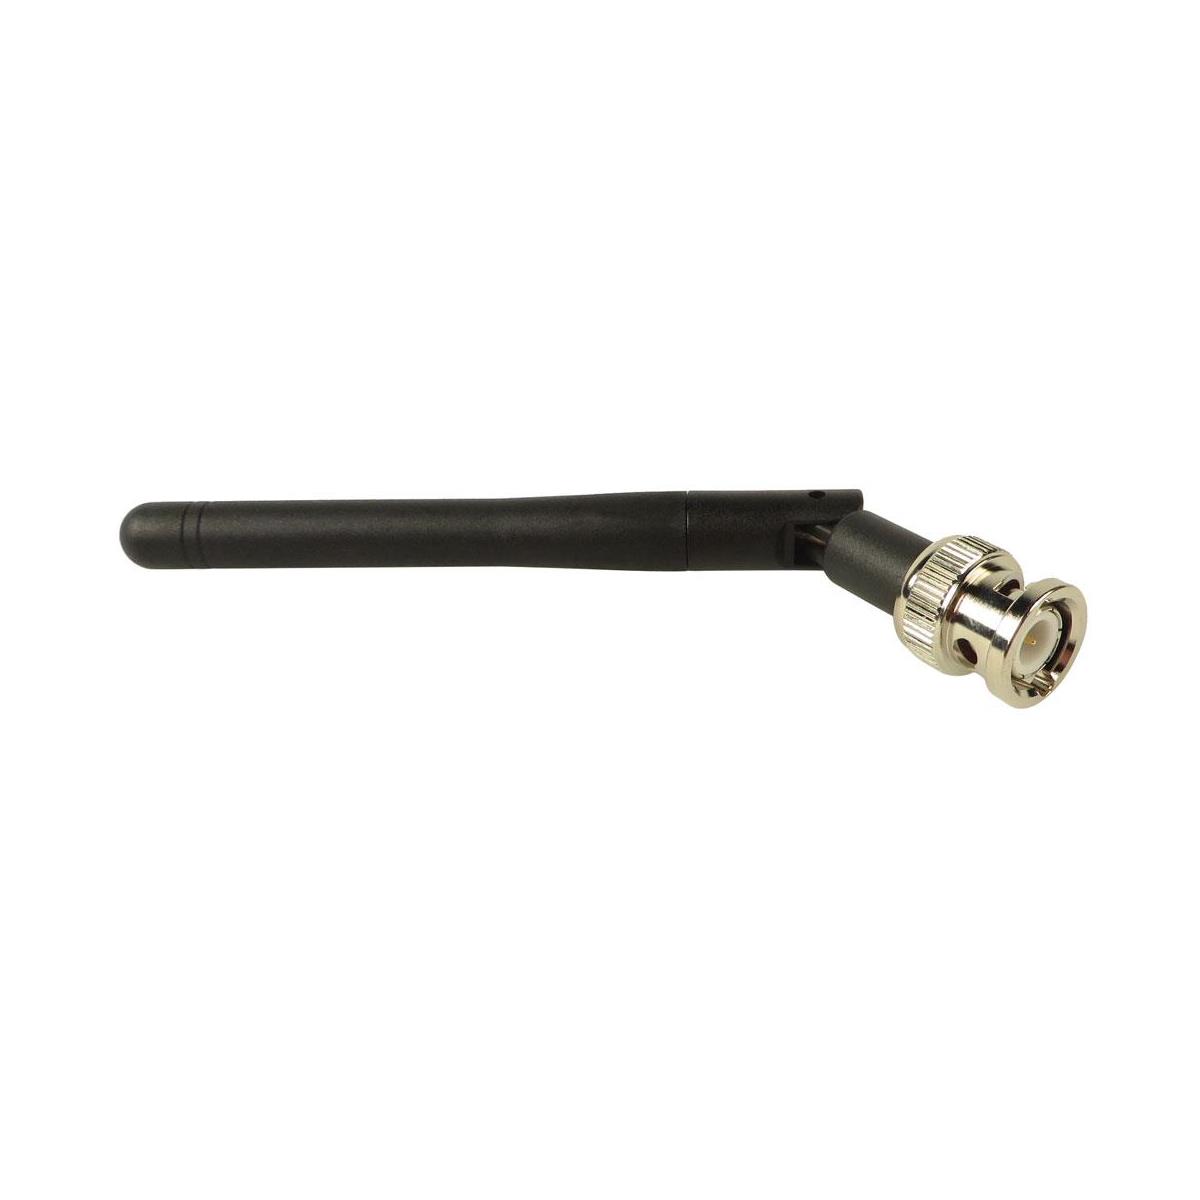 Image of Sennheiser Antenna Rod with BNC Connector